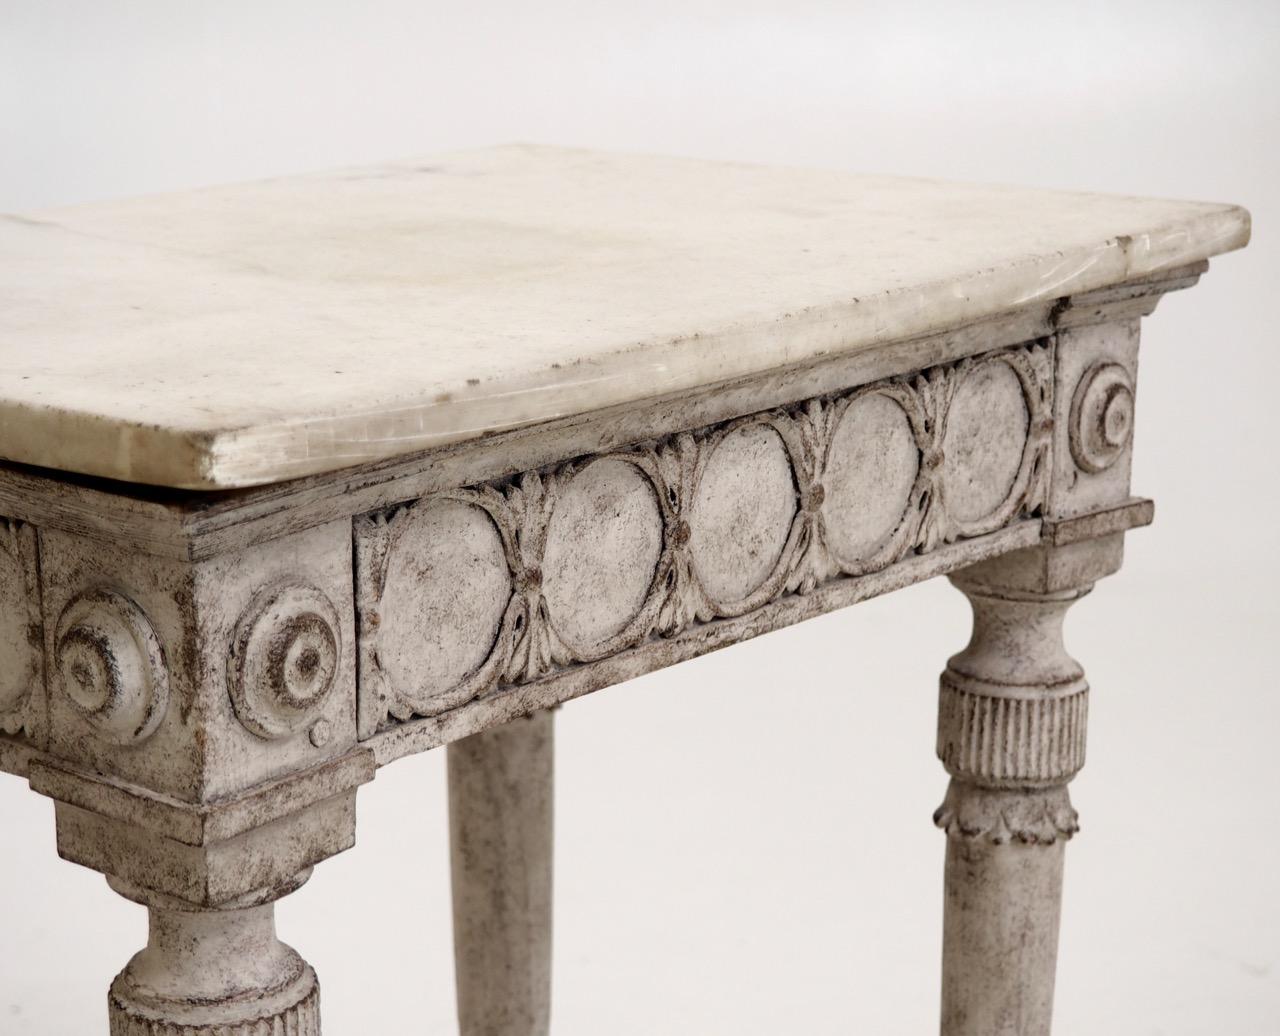 Important Danish console table, attributed to C.J. Lillie, circa 1780. With marble top. See Liselund Castle for similar pieces by C.J. Lillie.
Measures: H. 72 W. 58 D. 39 cm 
H. 28.3 W. 22.8 D. 15.3 in.